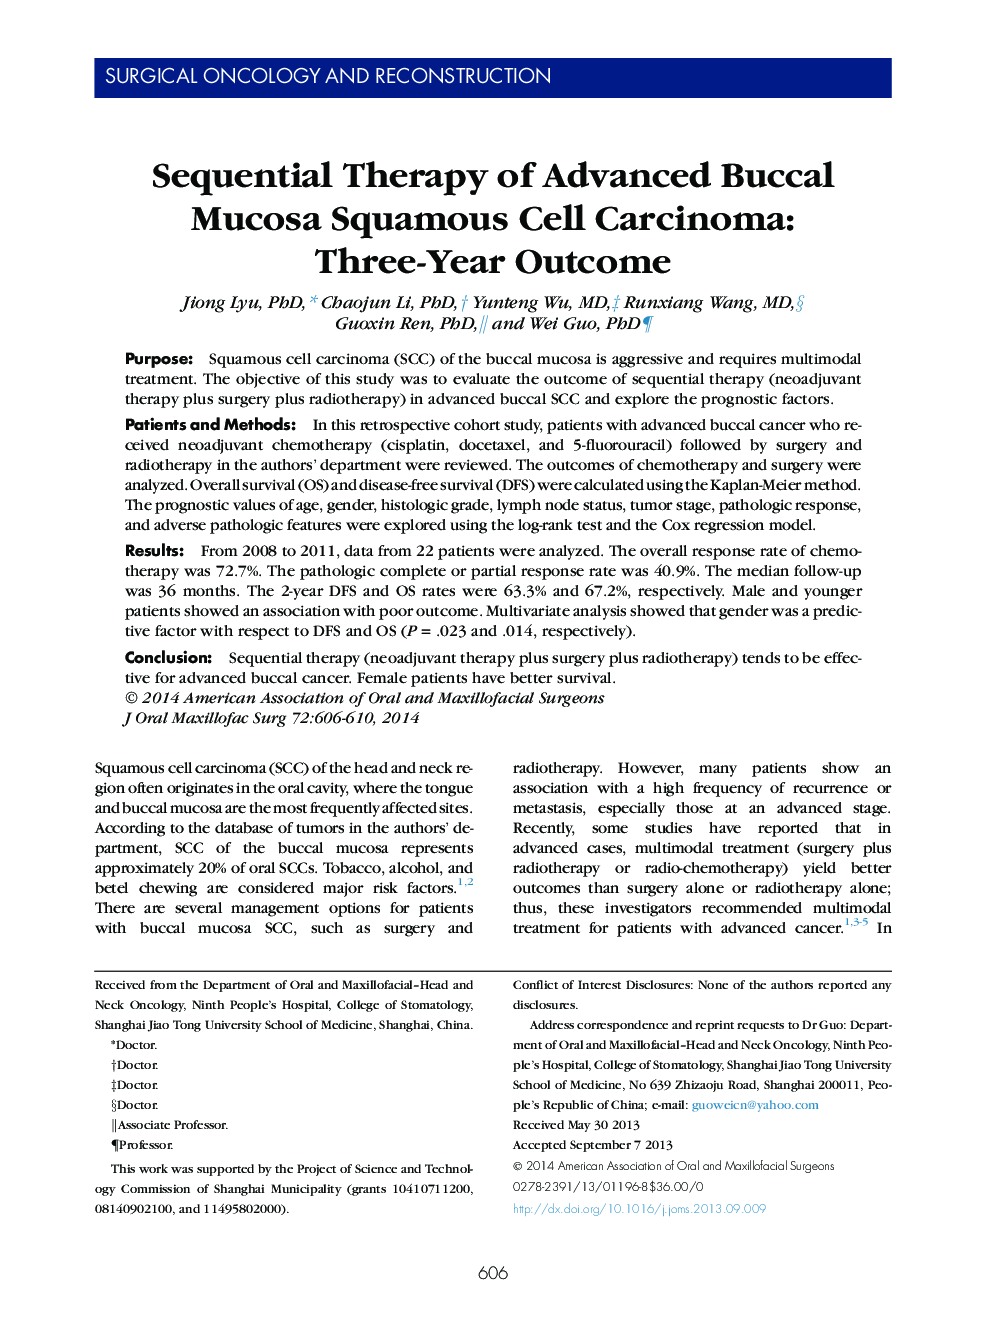 Sequential Therapy of Advanced Buccal Mucosa Squamous Cell Carcinoma: Three-Year Outcome